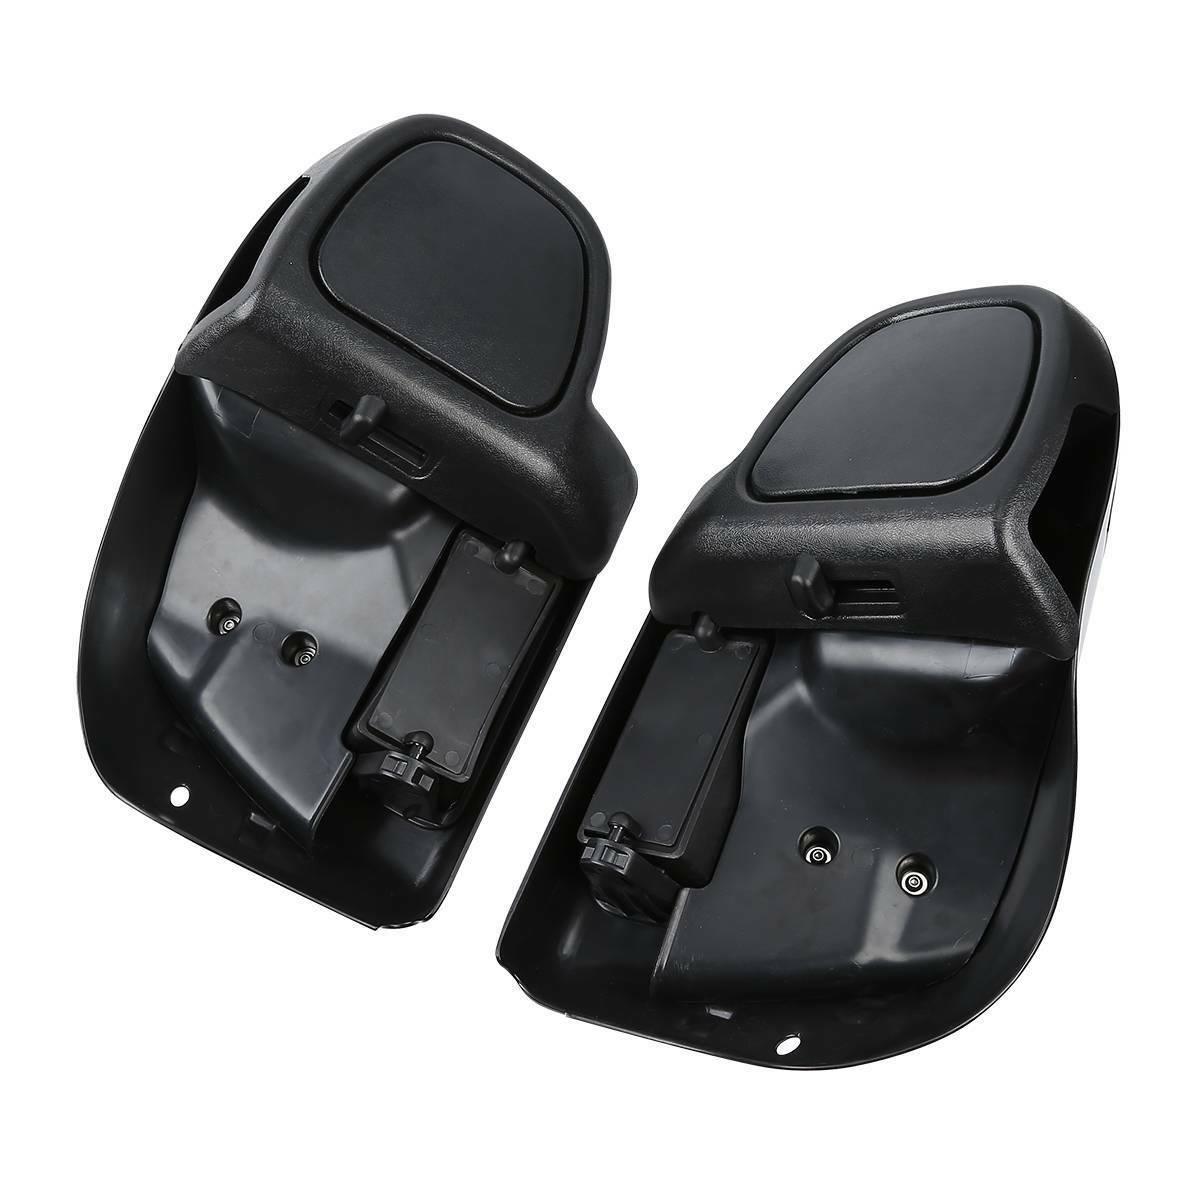 Black Lower Vented Fairing &Water-Cooled Fit For Harley Touring Road Glide 14-22 - Moto Life Products